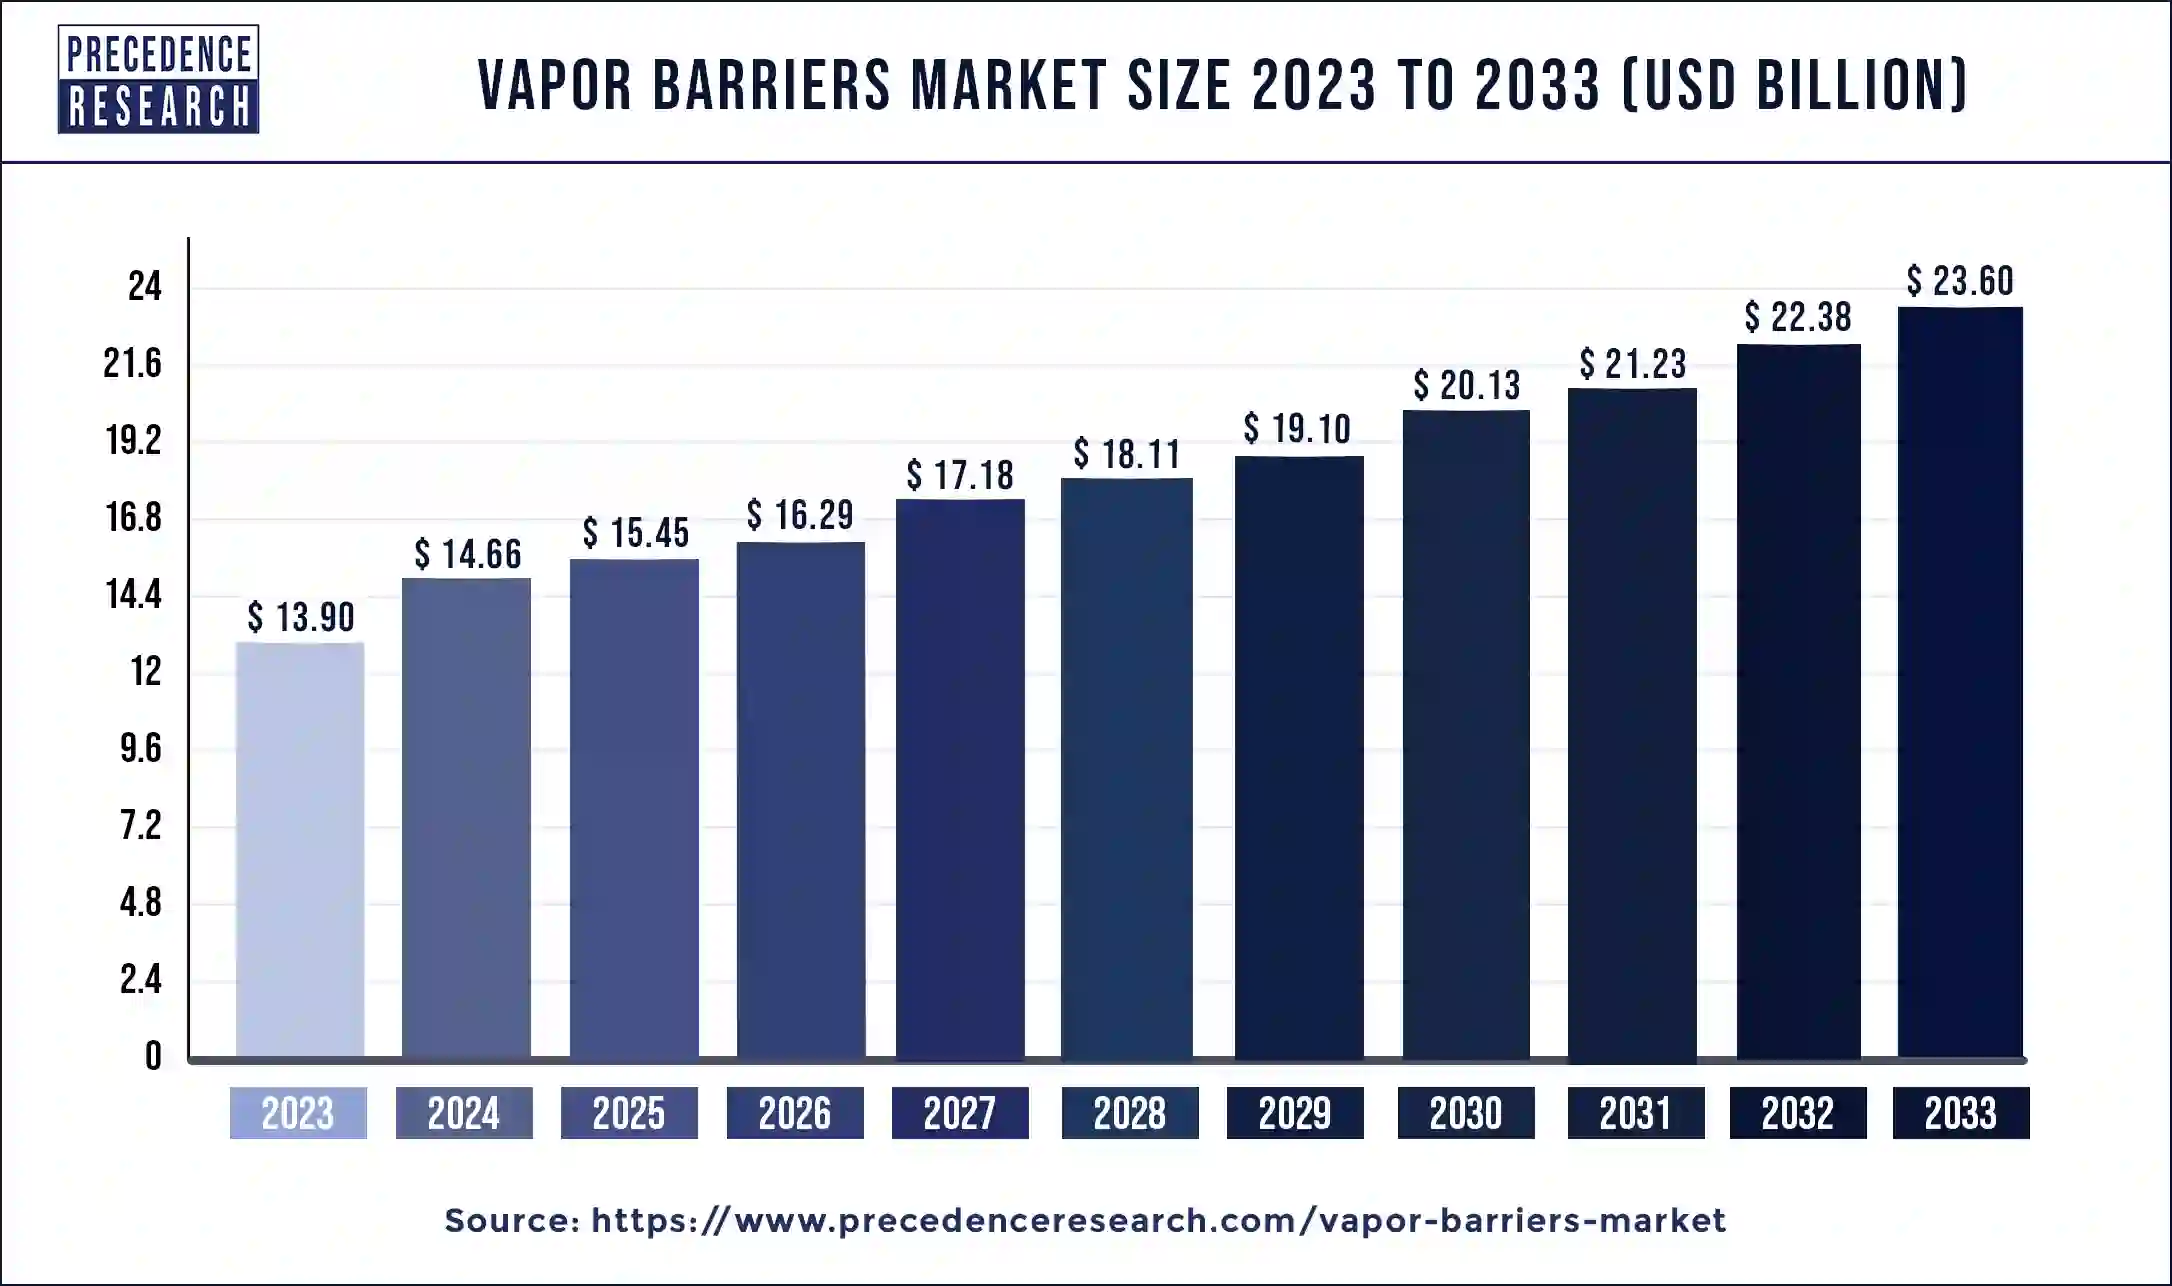 Vapor Barriers Market Size 2024 to 2033